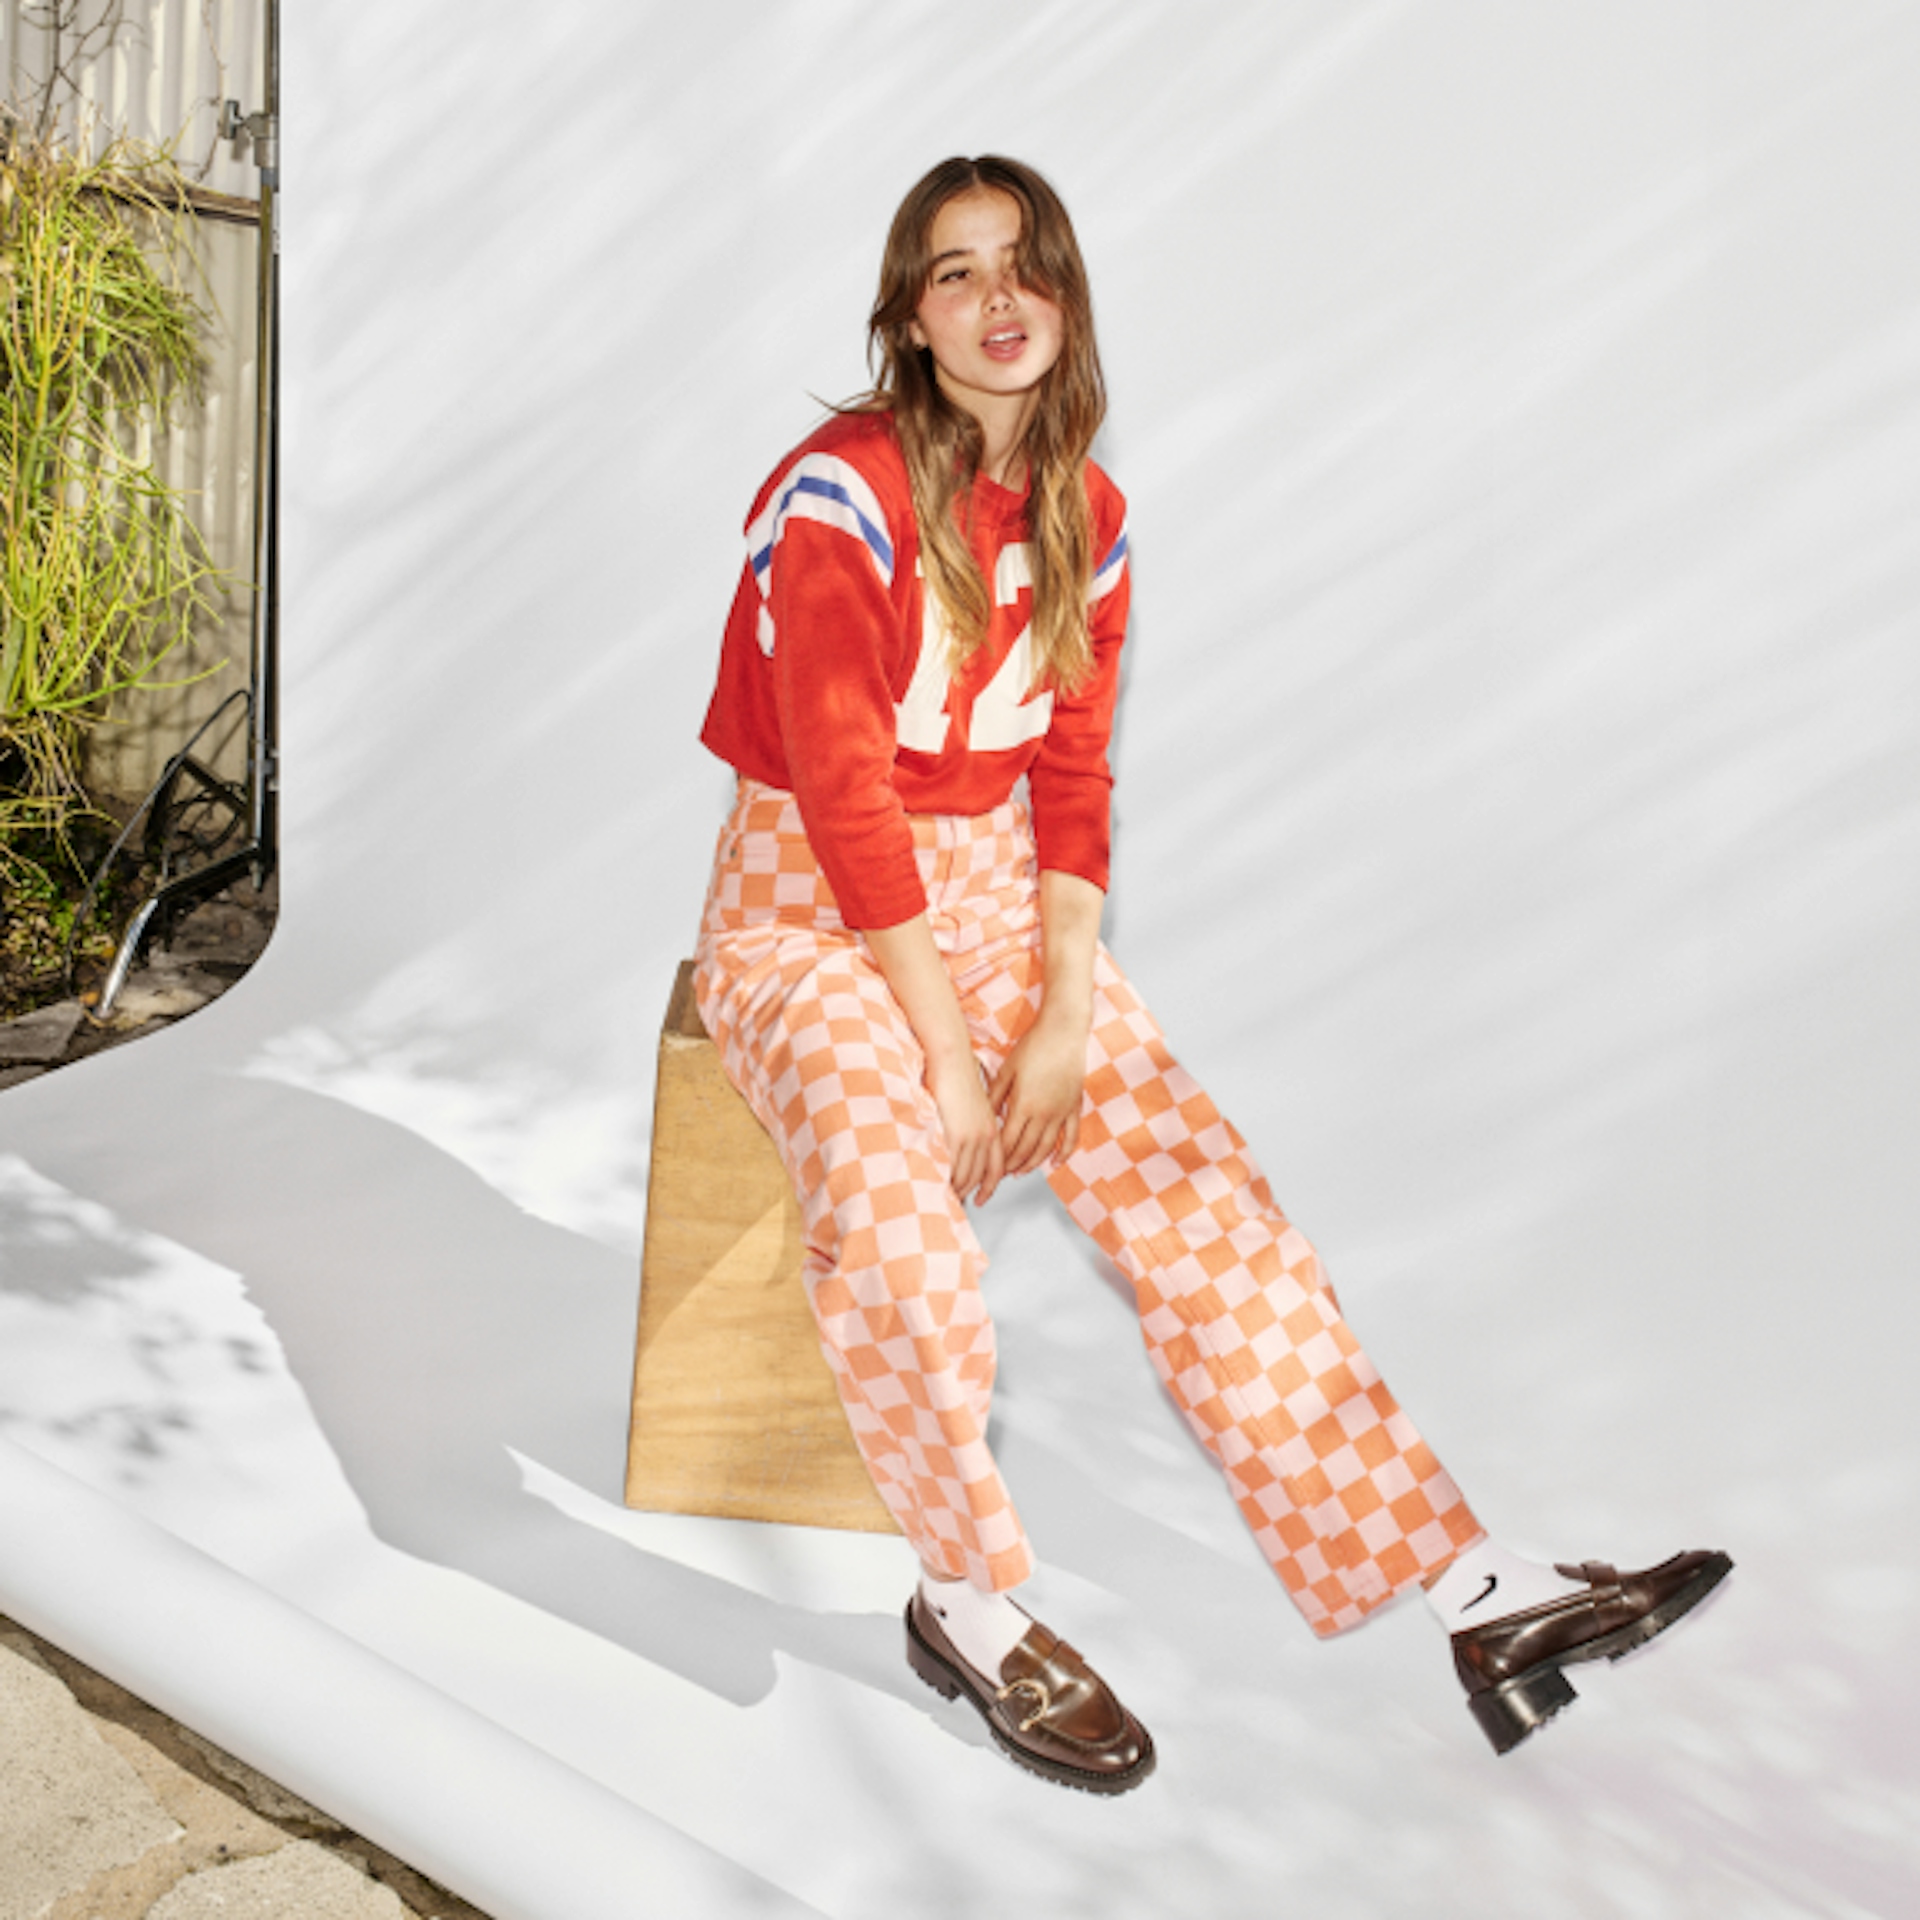 The image shows a young woman seated on a wooden block, dressed in a red cropped sweatshirt with white and blue stripes and the number "72." She pairs it with high-waisted, pink and white checkered pants. Her outfit is completed with white socks and brown loafers. The background is a bright, white backdrop with some natural outdoor elements visible on the left side.